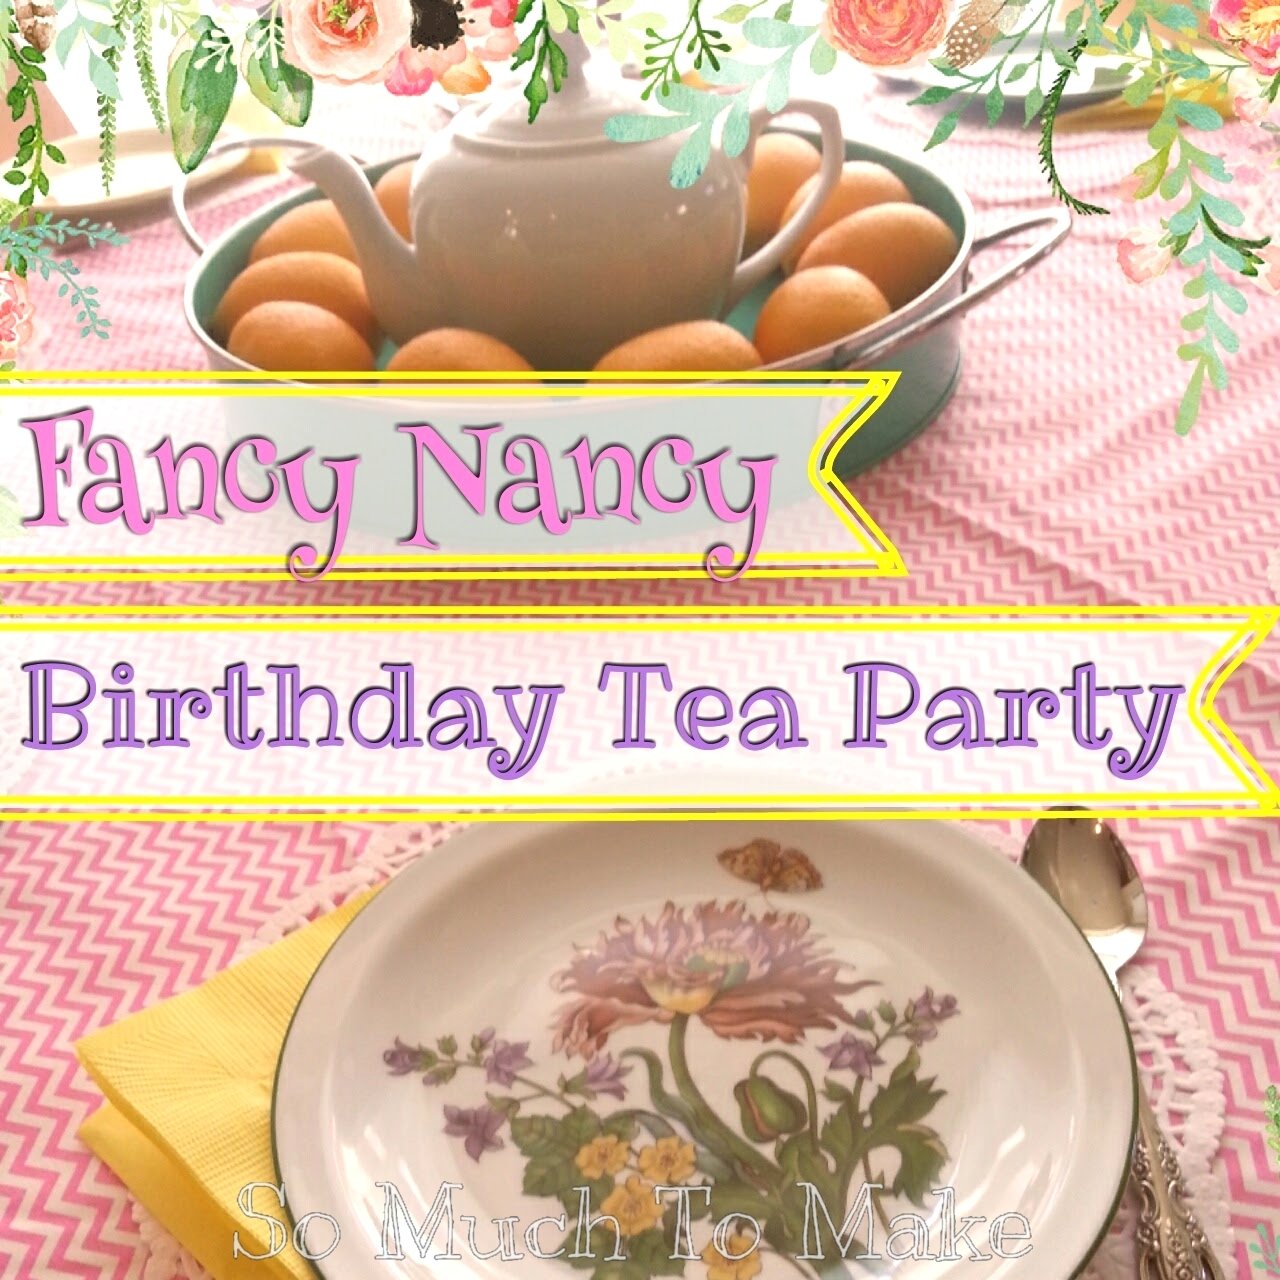 10 Attractive Fancy Nancy Tea Party Ideas fancy nancy inspired birthday tea party so much to make 2022